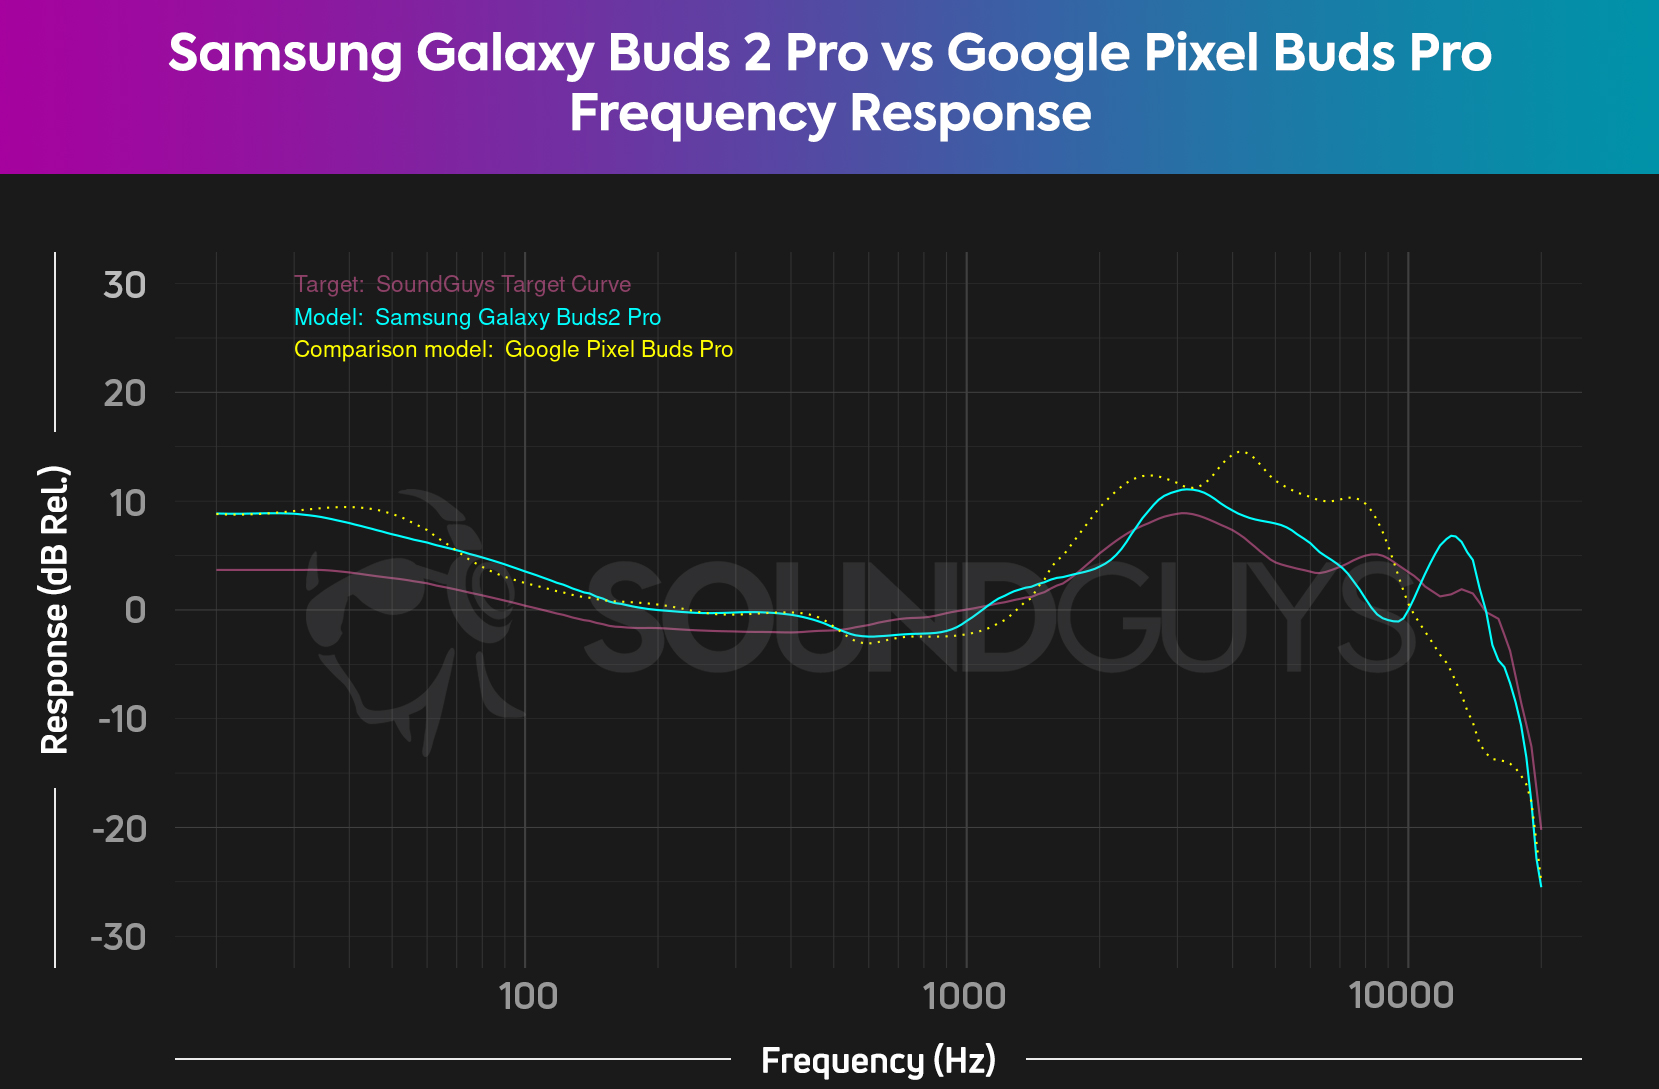 A chart compares the Samsung Galaxy Buds 2 Pro frequency response to the Google Pixel Buds Pro, which more closely follows our Target Curve.